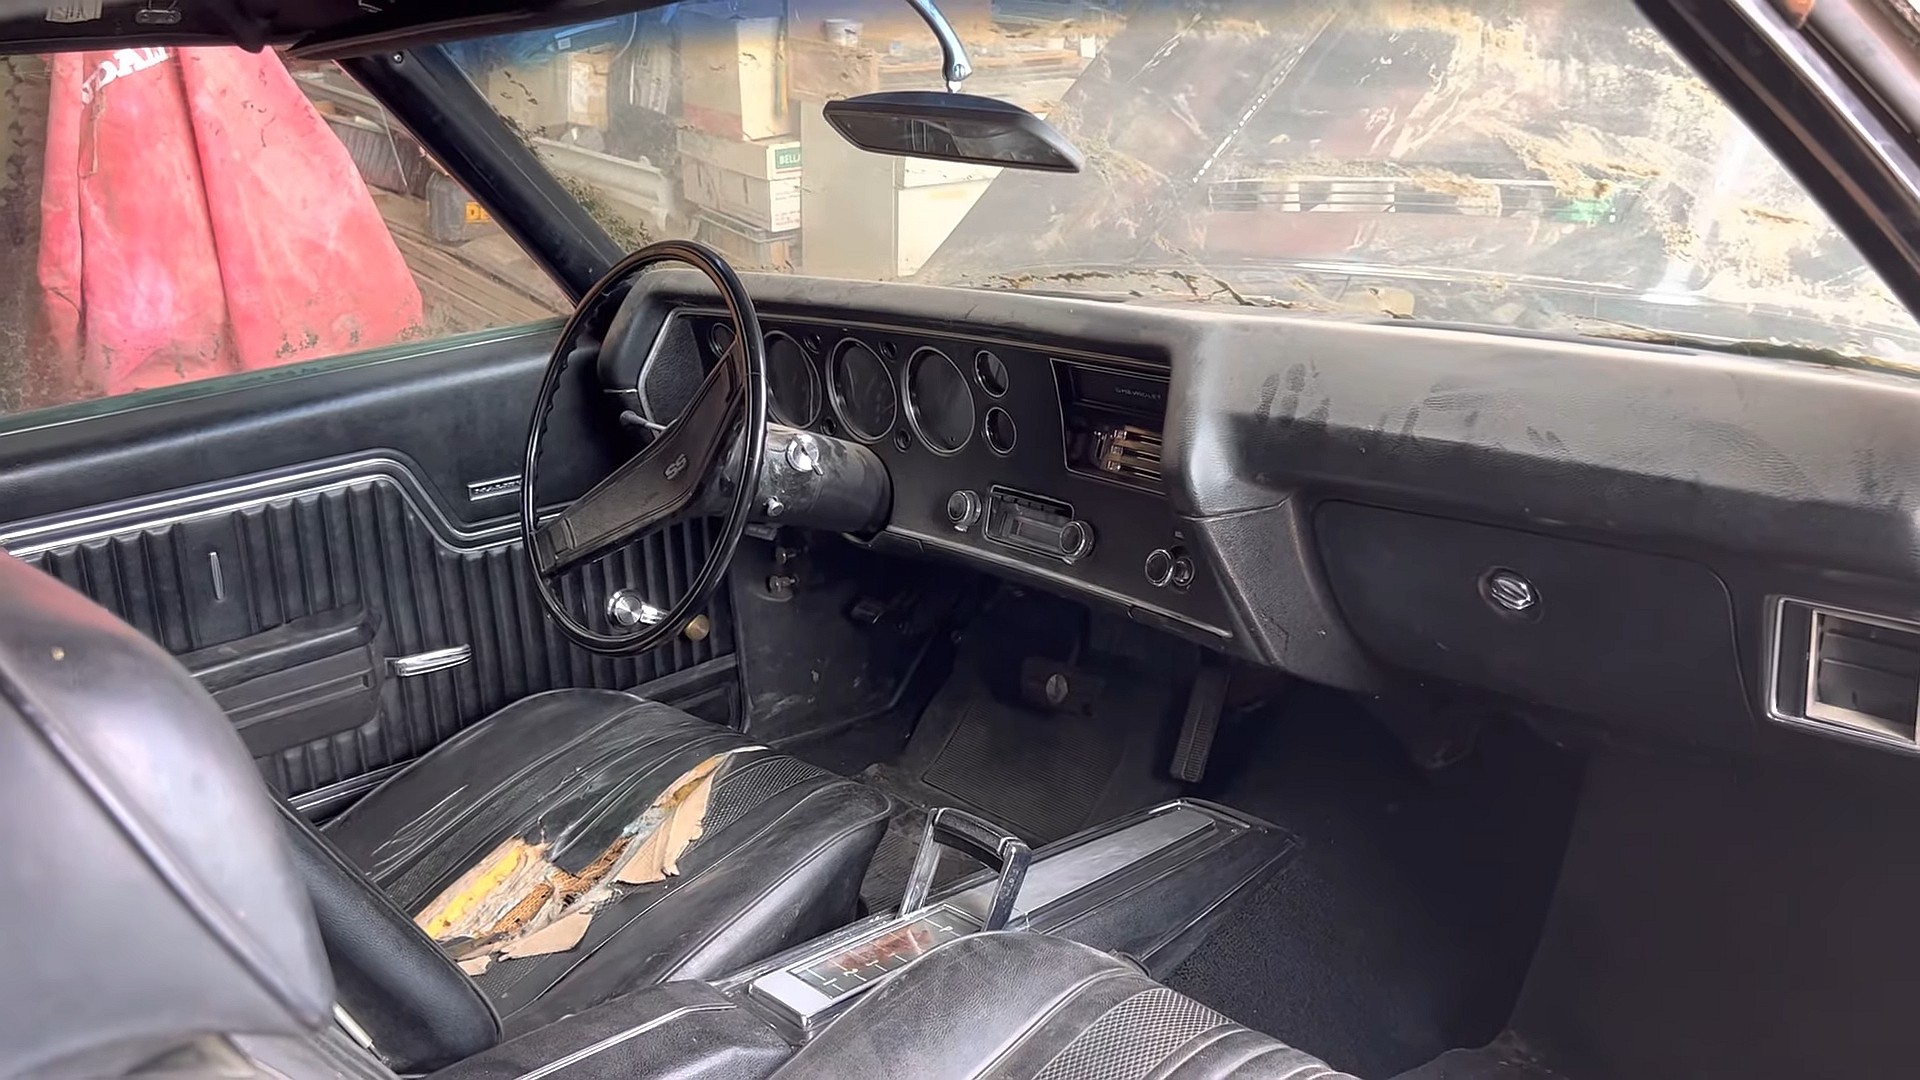 1970 chevrolet chevelle discovered after 43 years in a barn it s a holy grail ls6 6